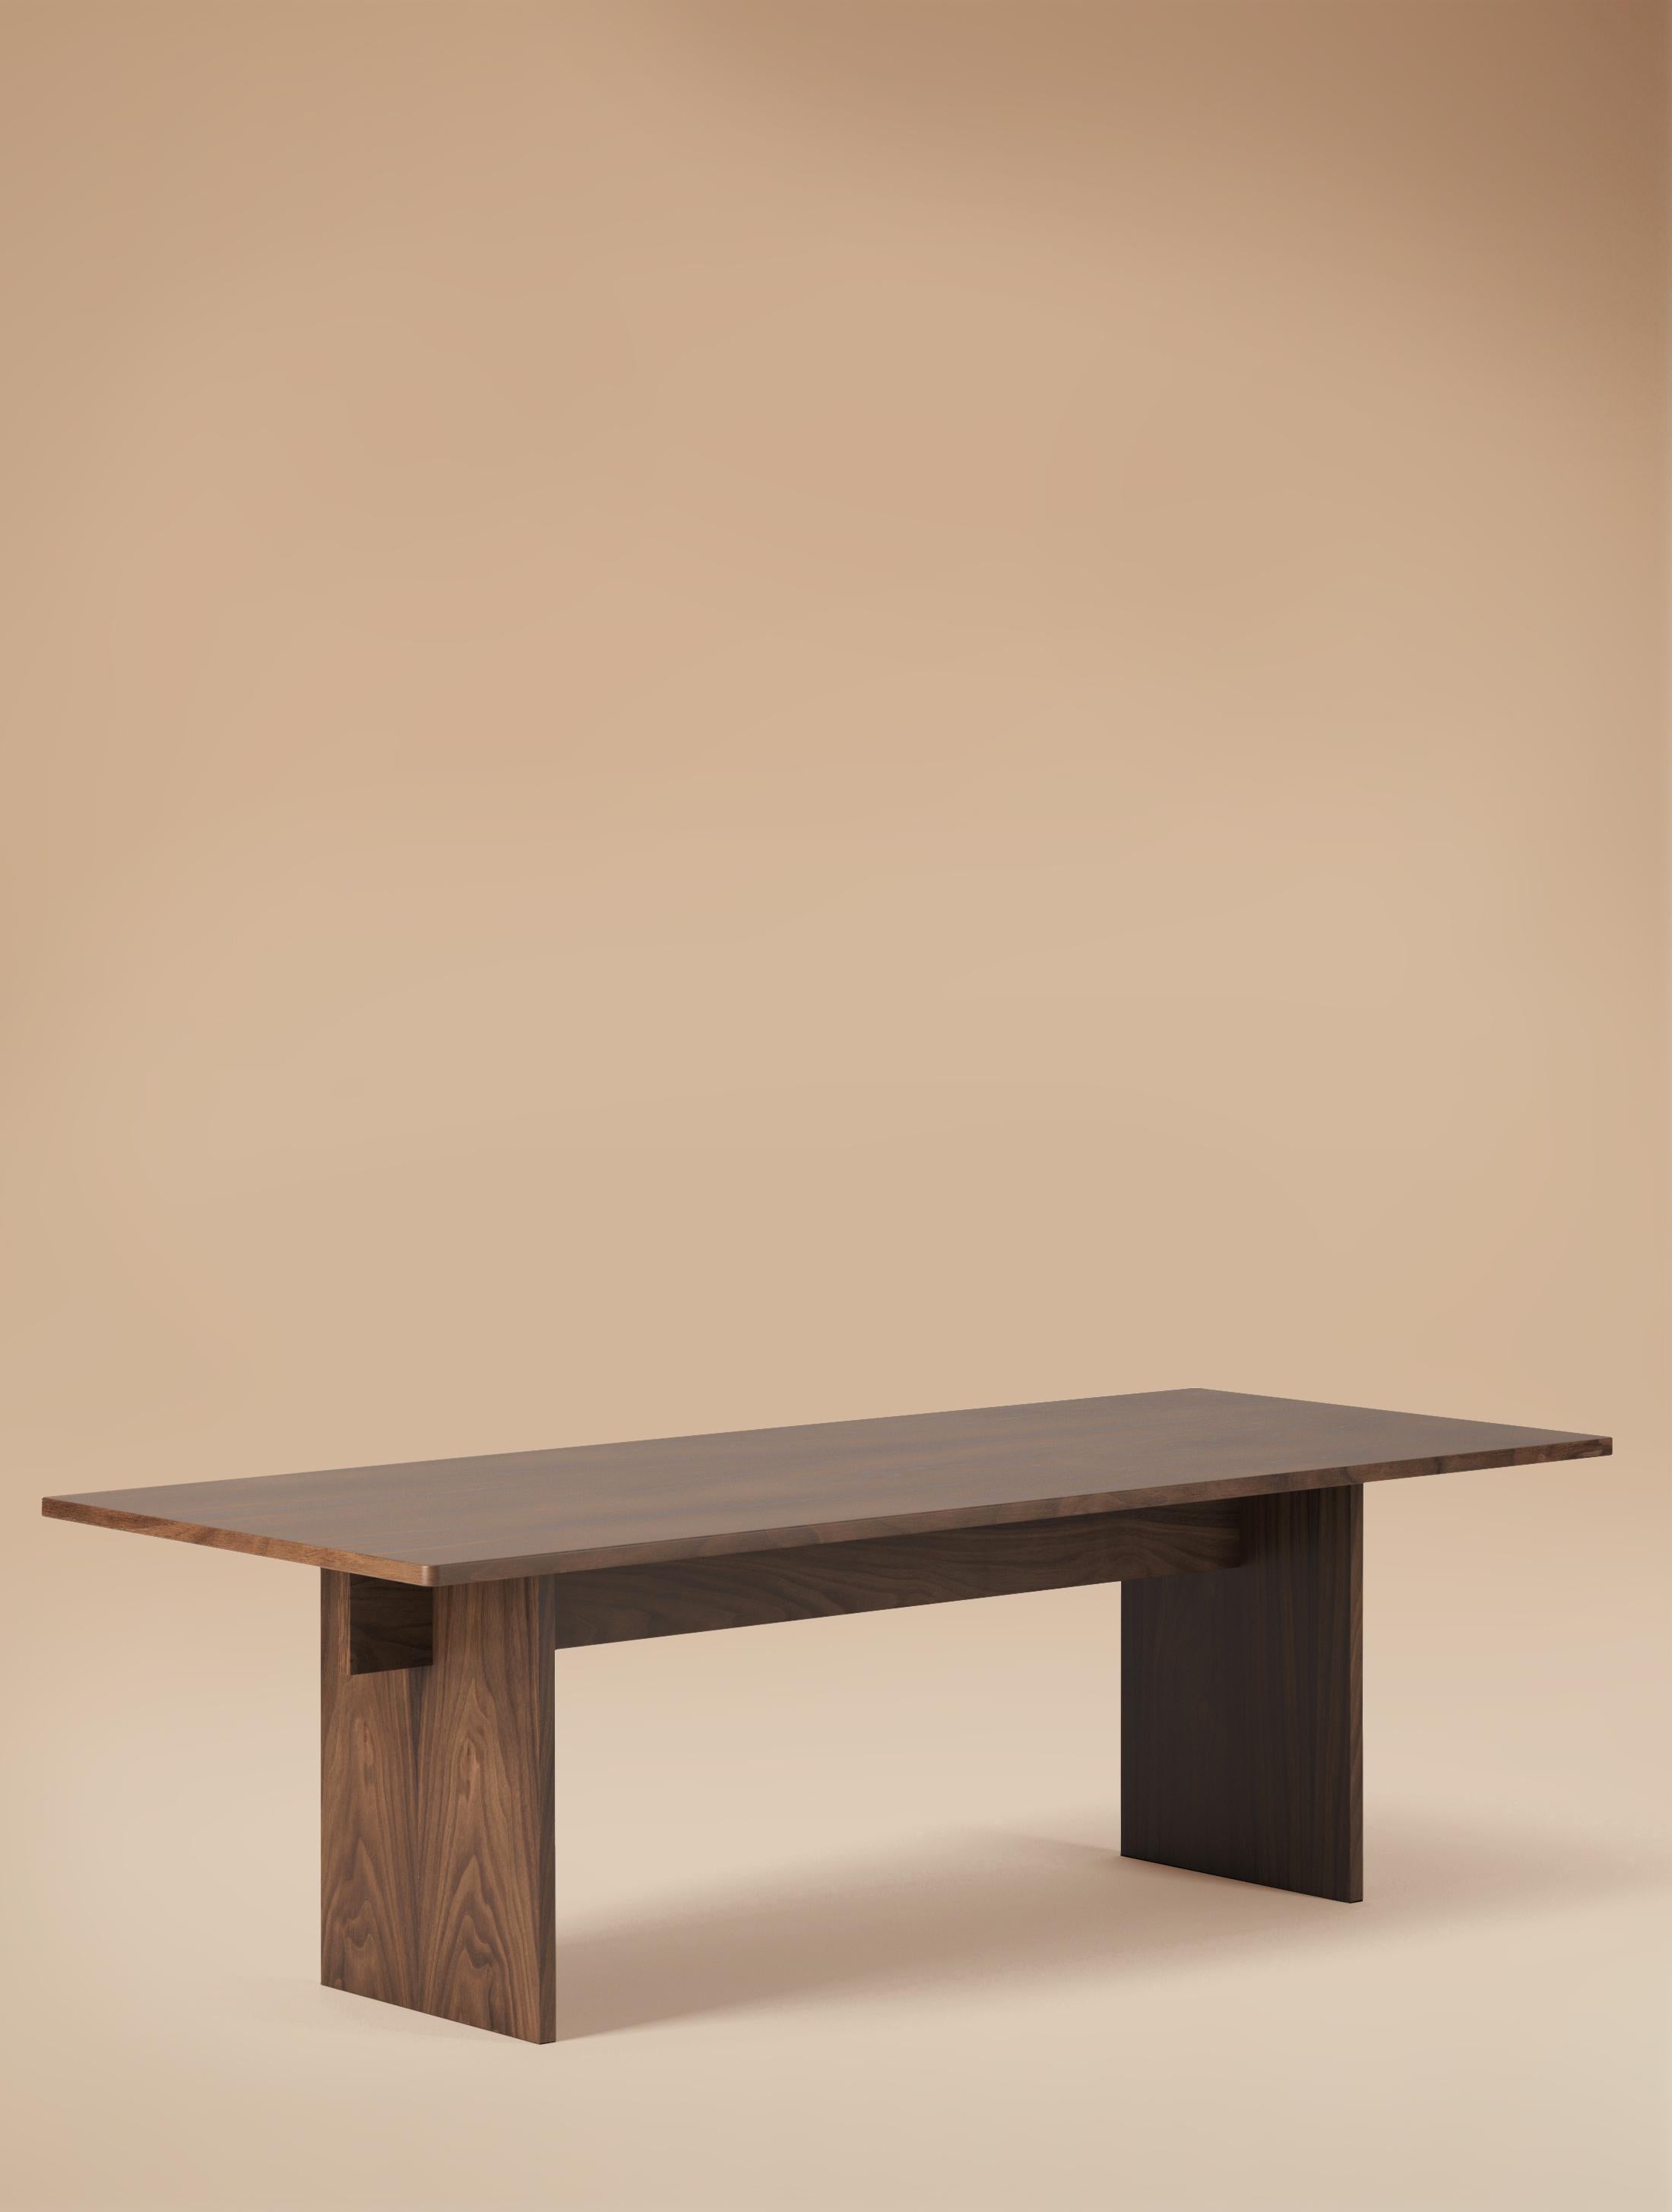 8 Seater Faure Table Handcrafted in Oak  by Kevin Frankental 6